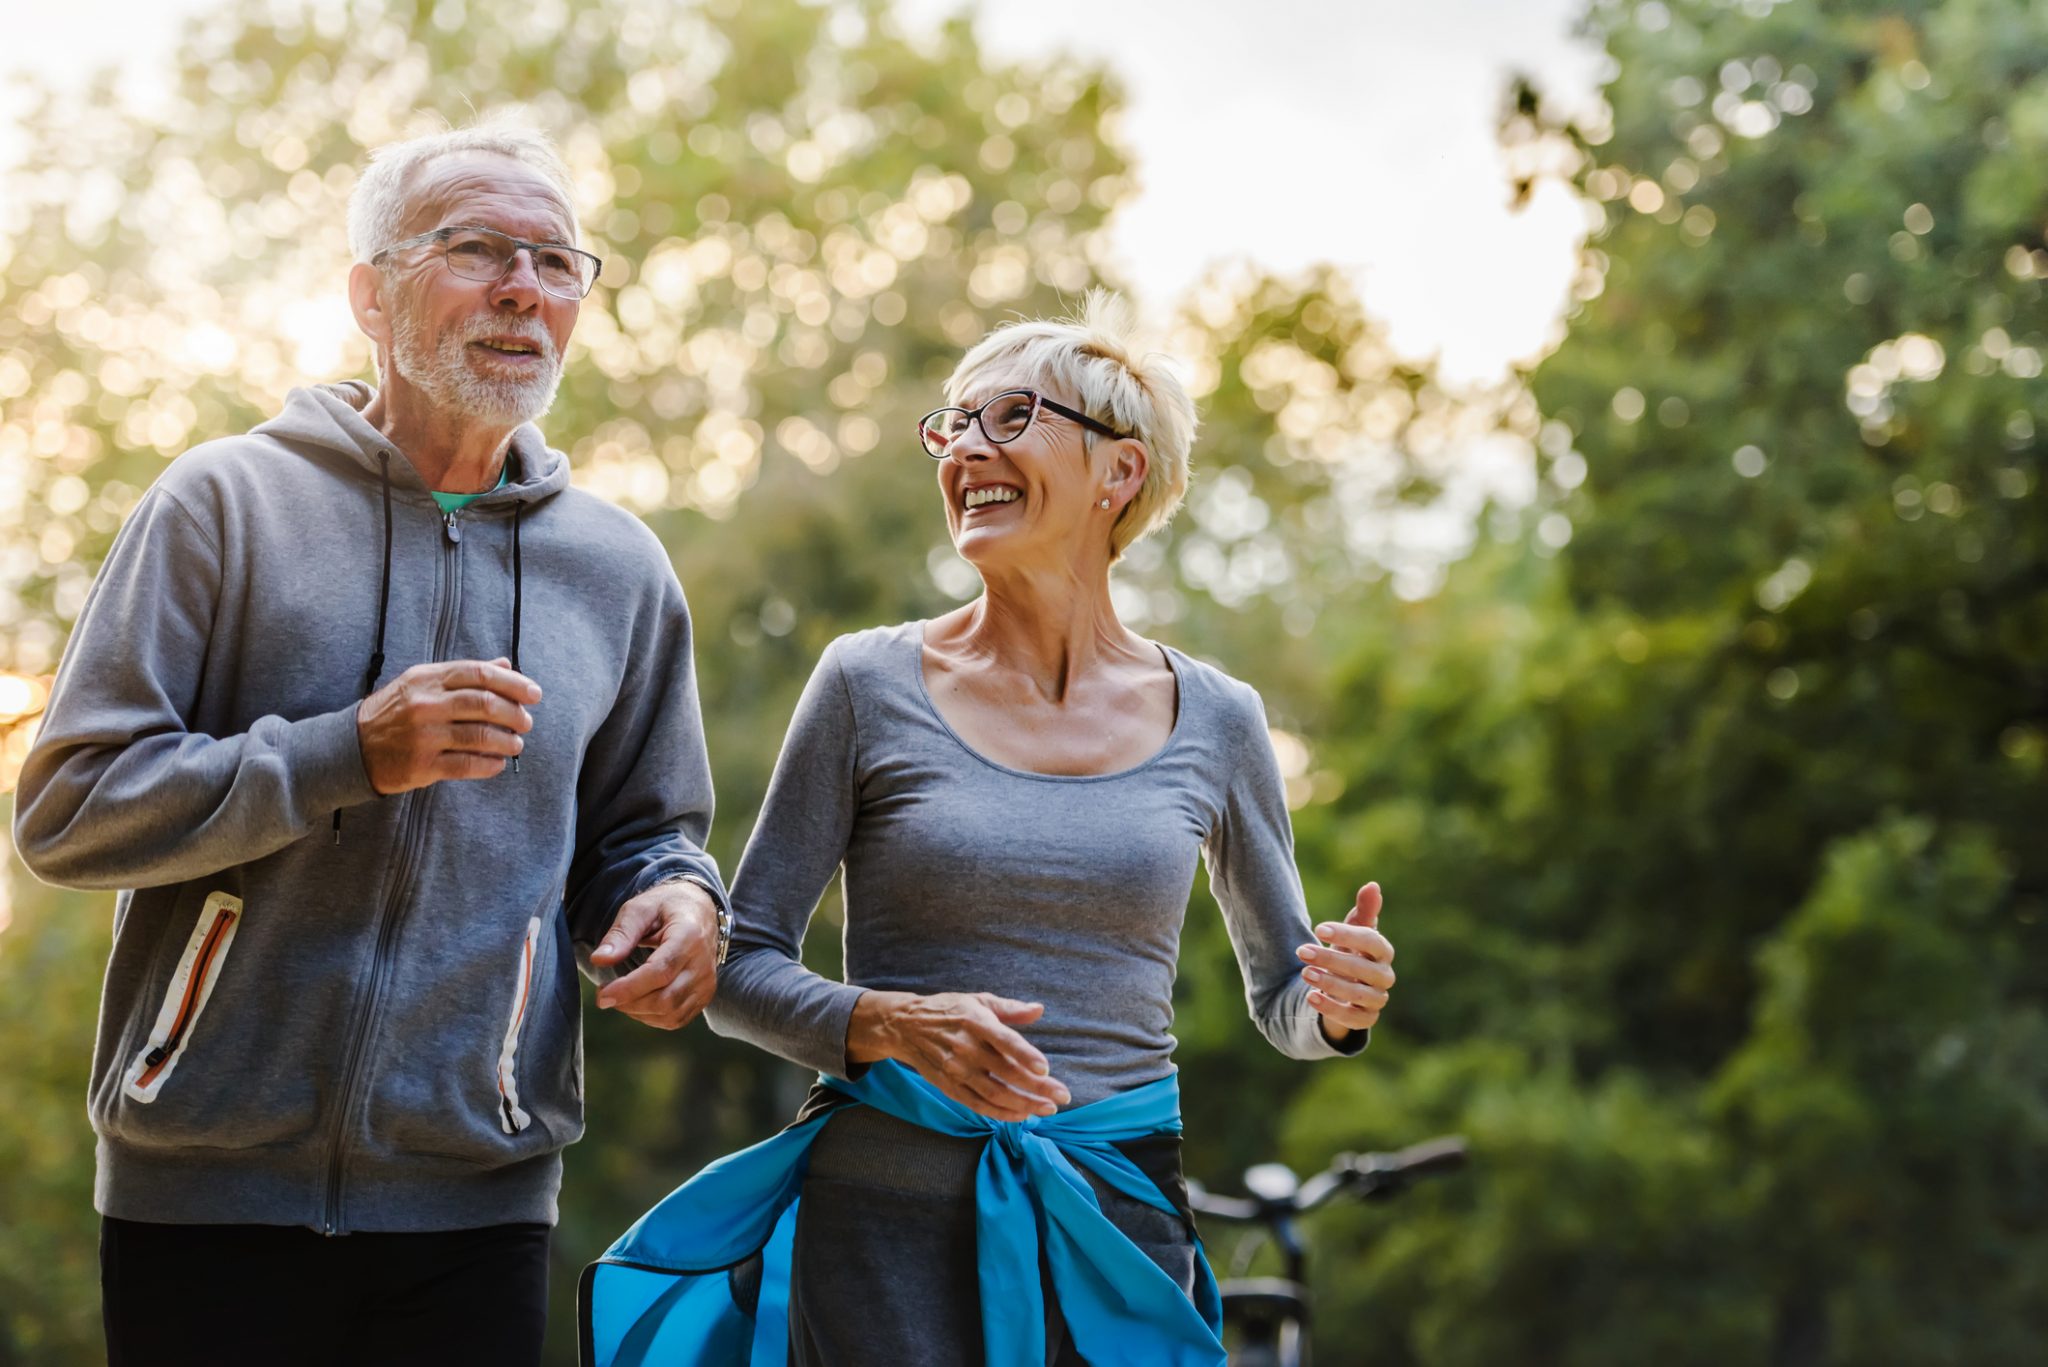 Fall Prevention: Tips and Risk Factors